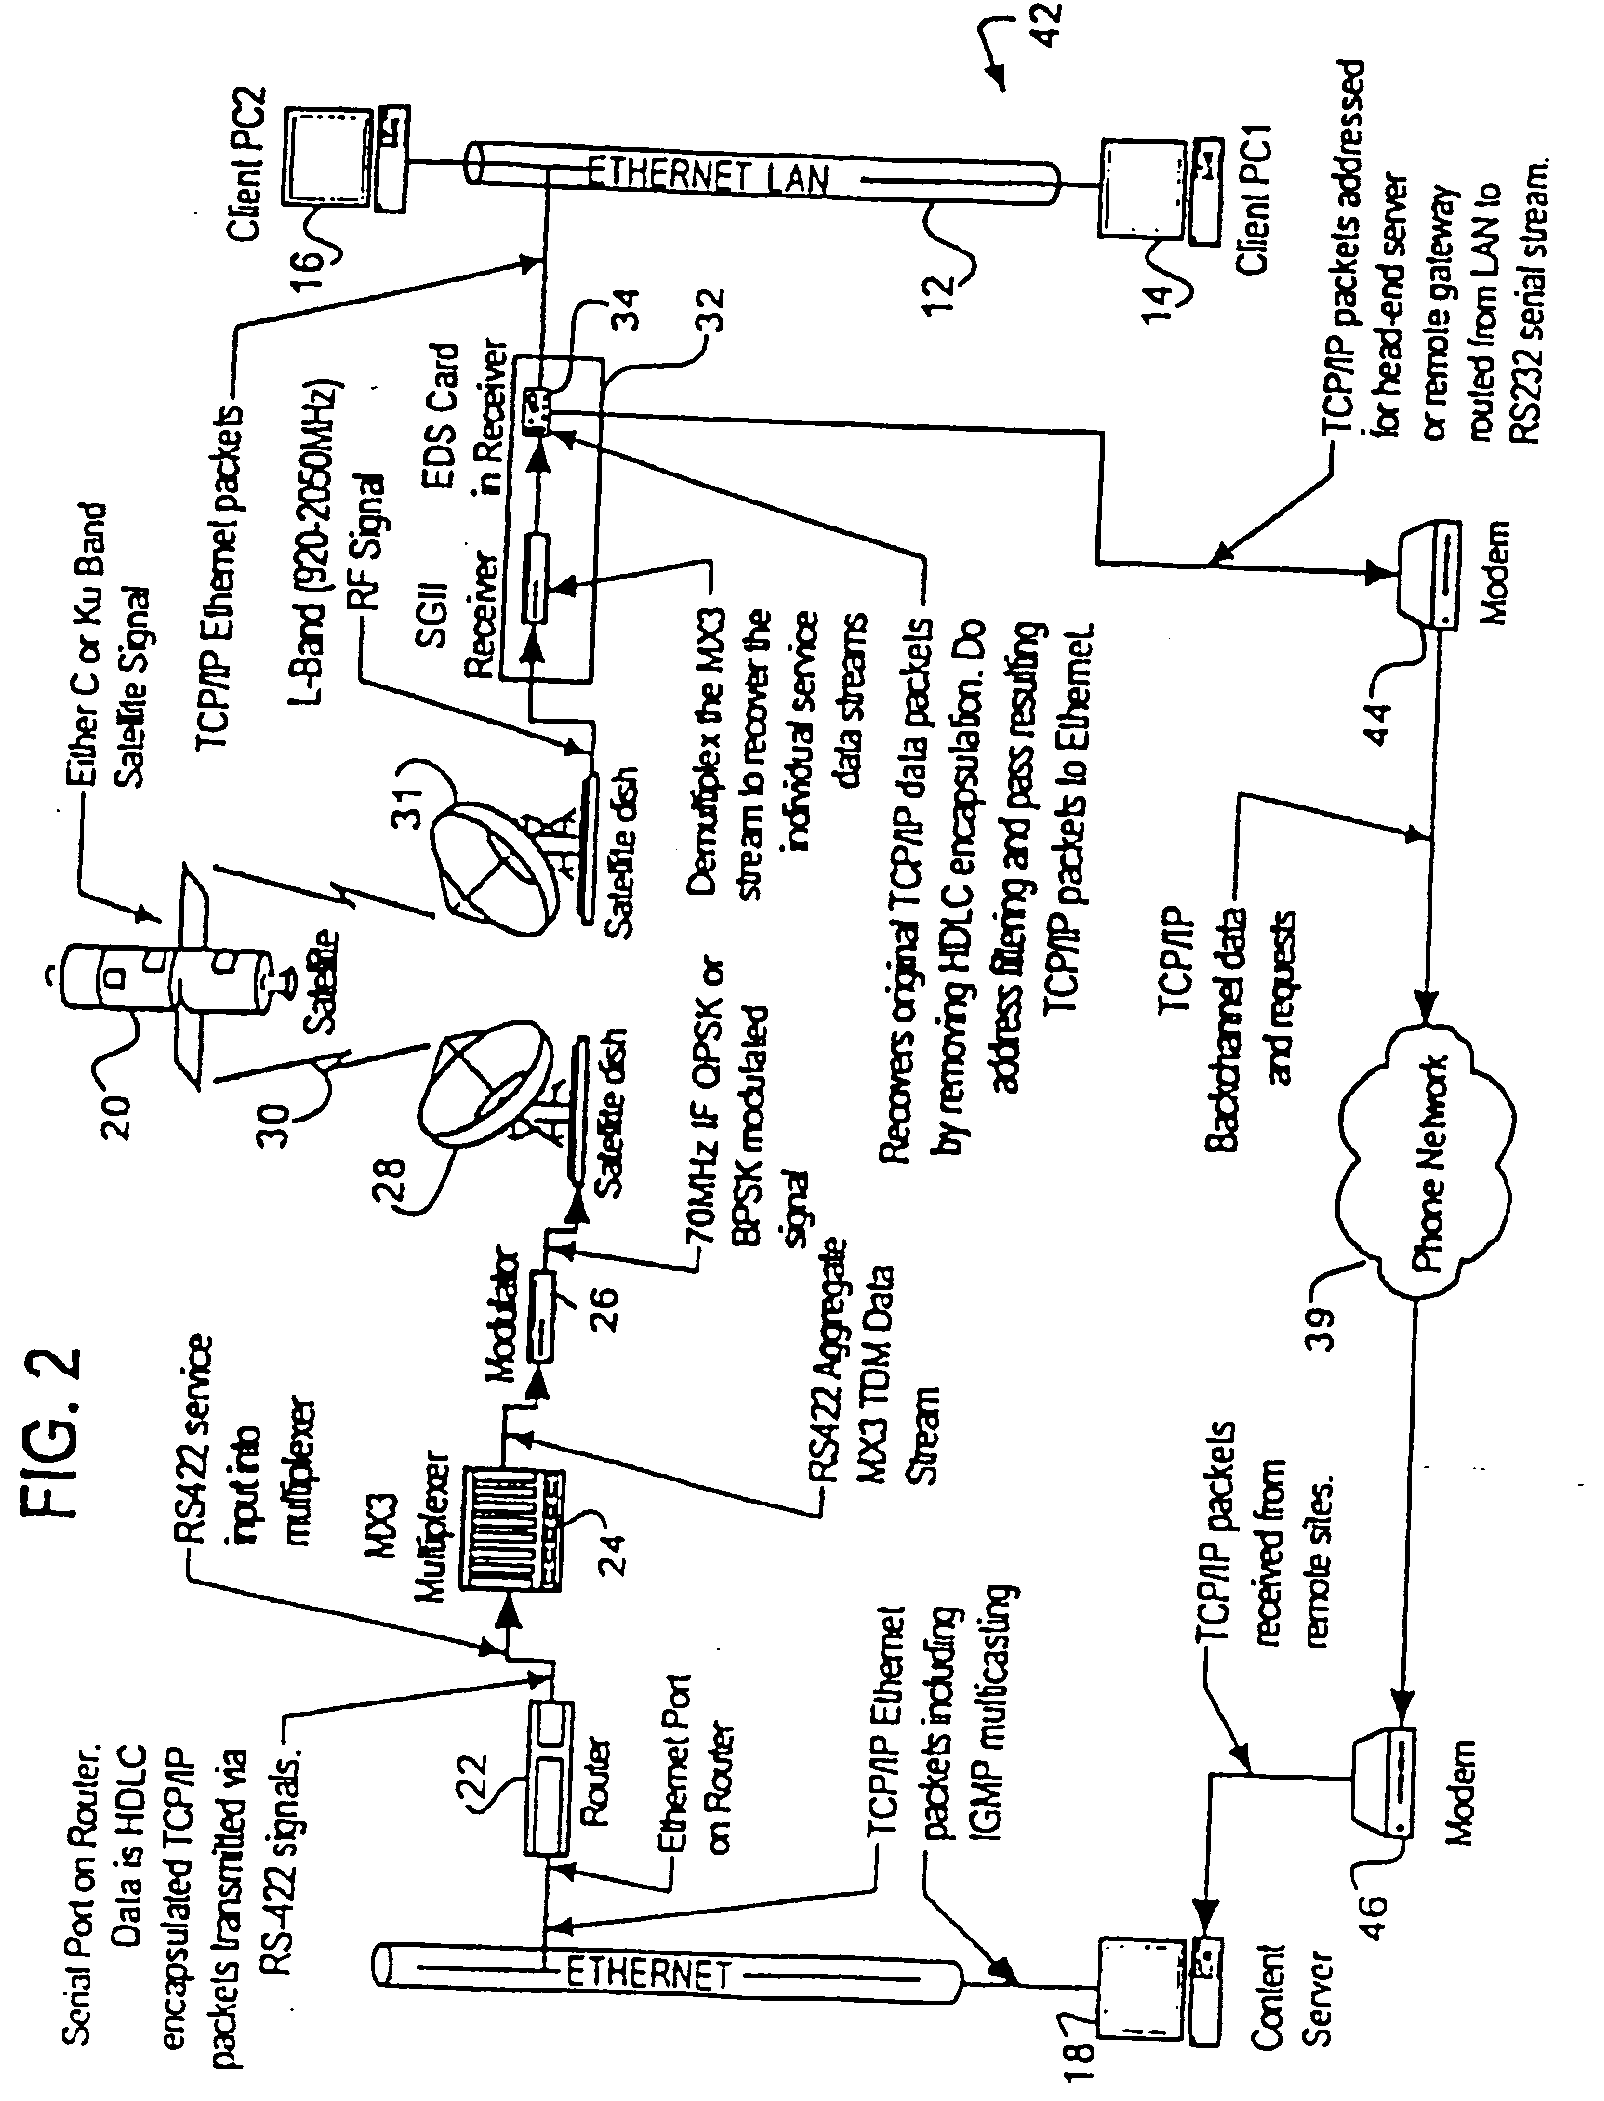 Satellite receiver/router, system, and method of use